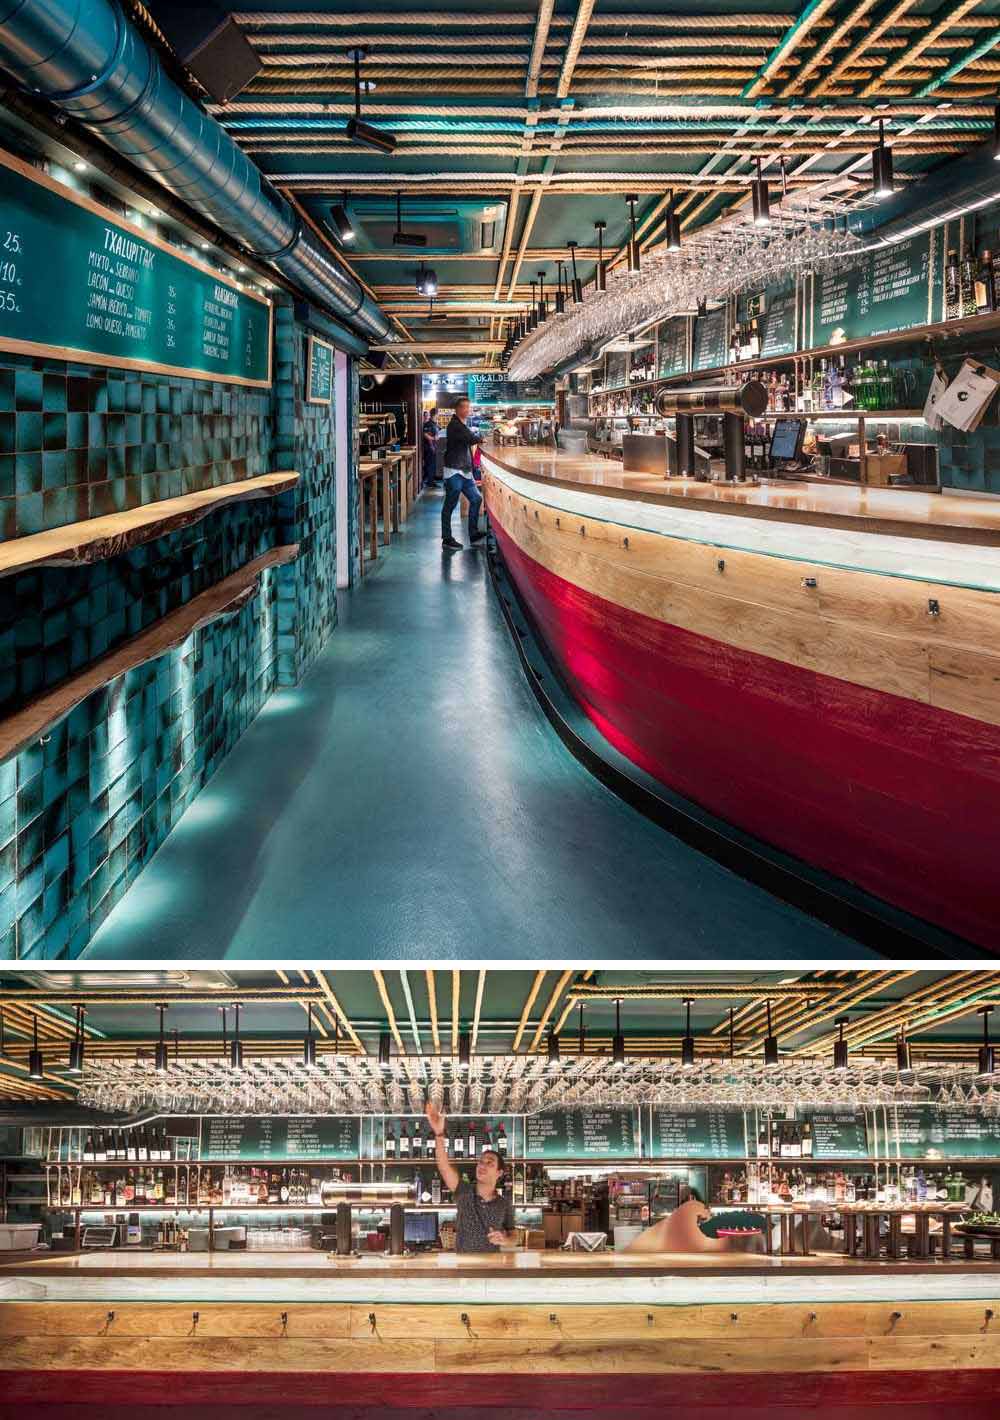 The name of the restaurant, Txalupa, is inspired by the name given to the fishing boats, while the curved wooden bar references the txalupas, both in its design, tones, and materiality.